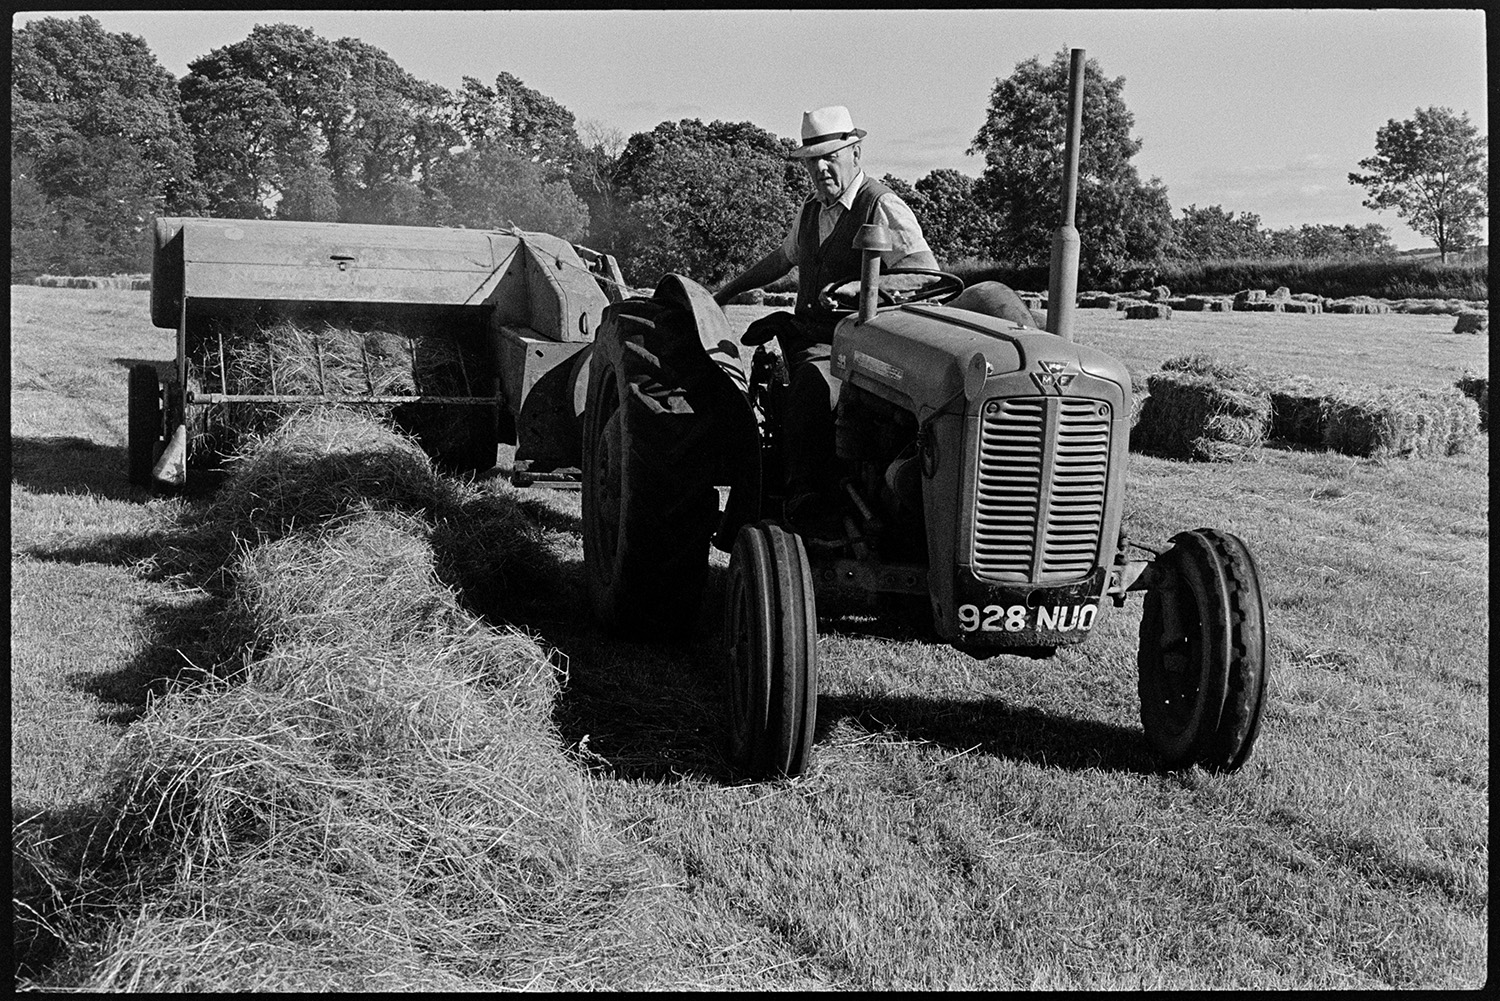 Children watching and helping farmer bale hay. 
[John Ward baling hay with a tractor and baler in a field at Parsonage, Iddesleigh. Other hay bales can be seen in the field in the background.]